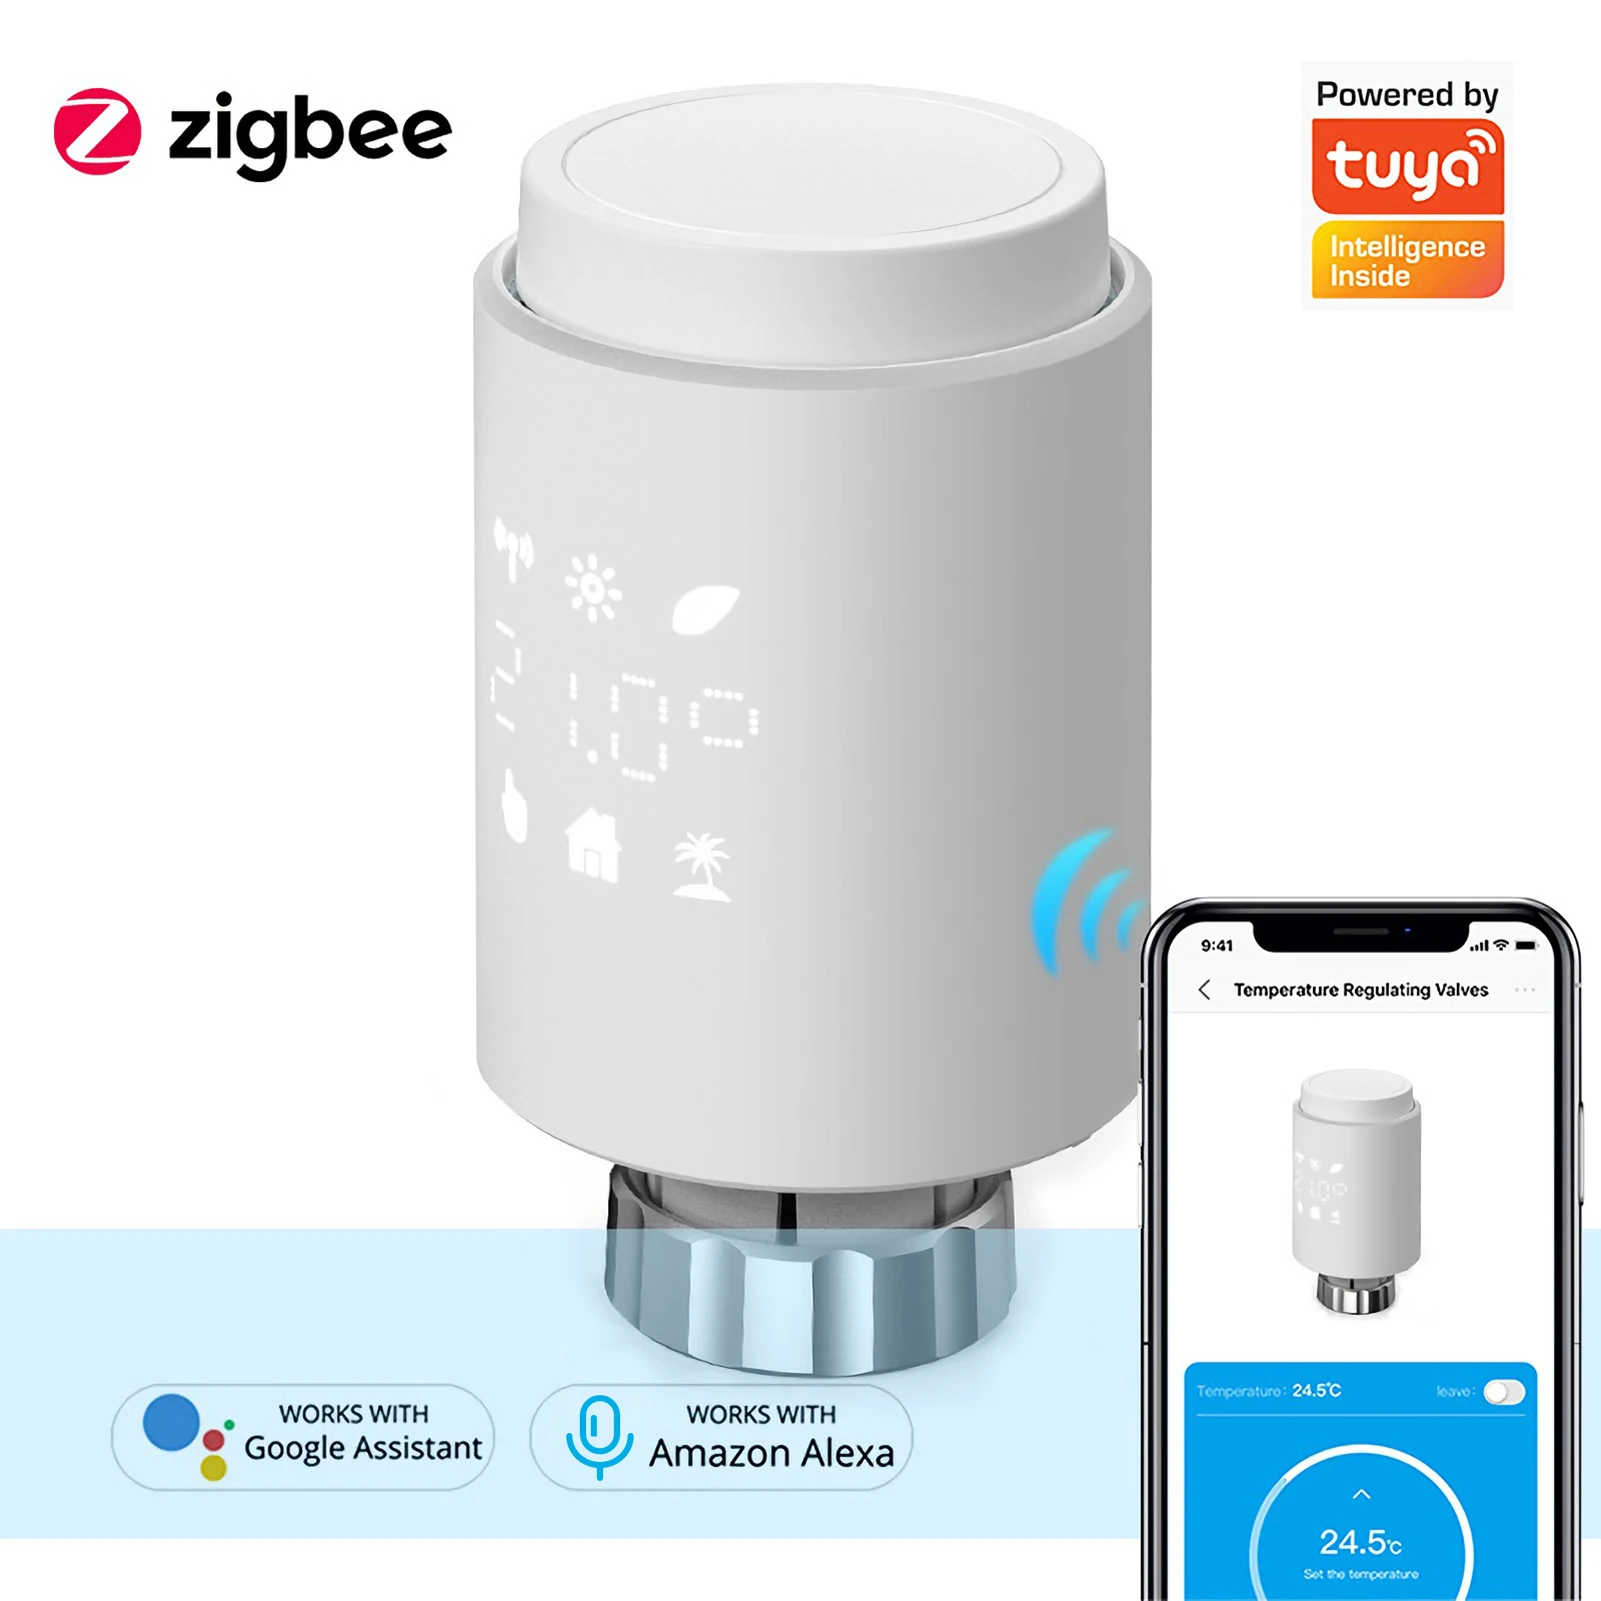 House Home ZigBee Smart Thermostat Temperature Controller Heating &amp; Accurate TRV - $27.00